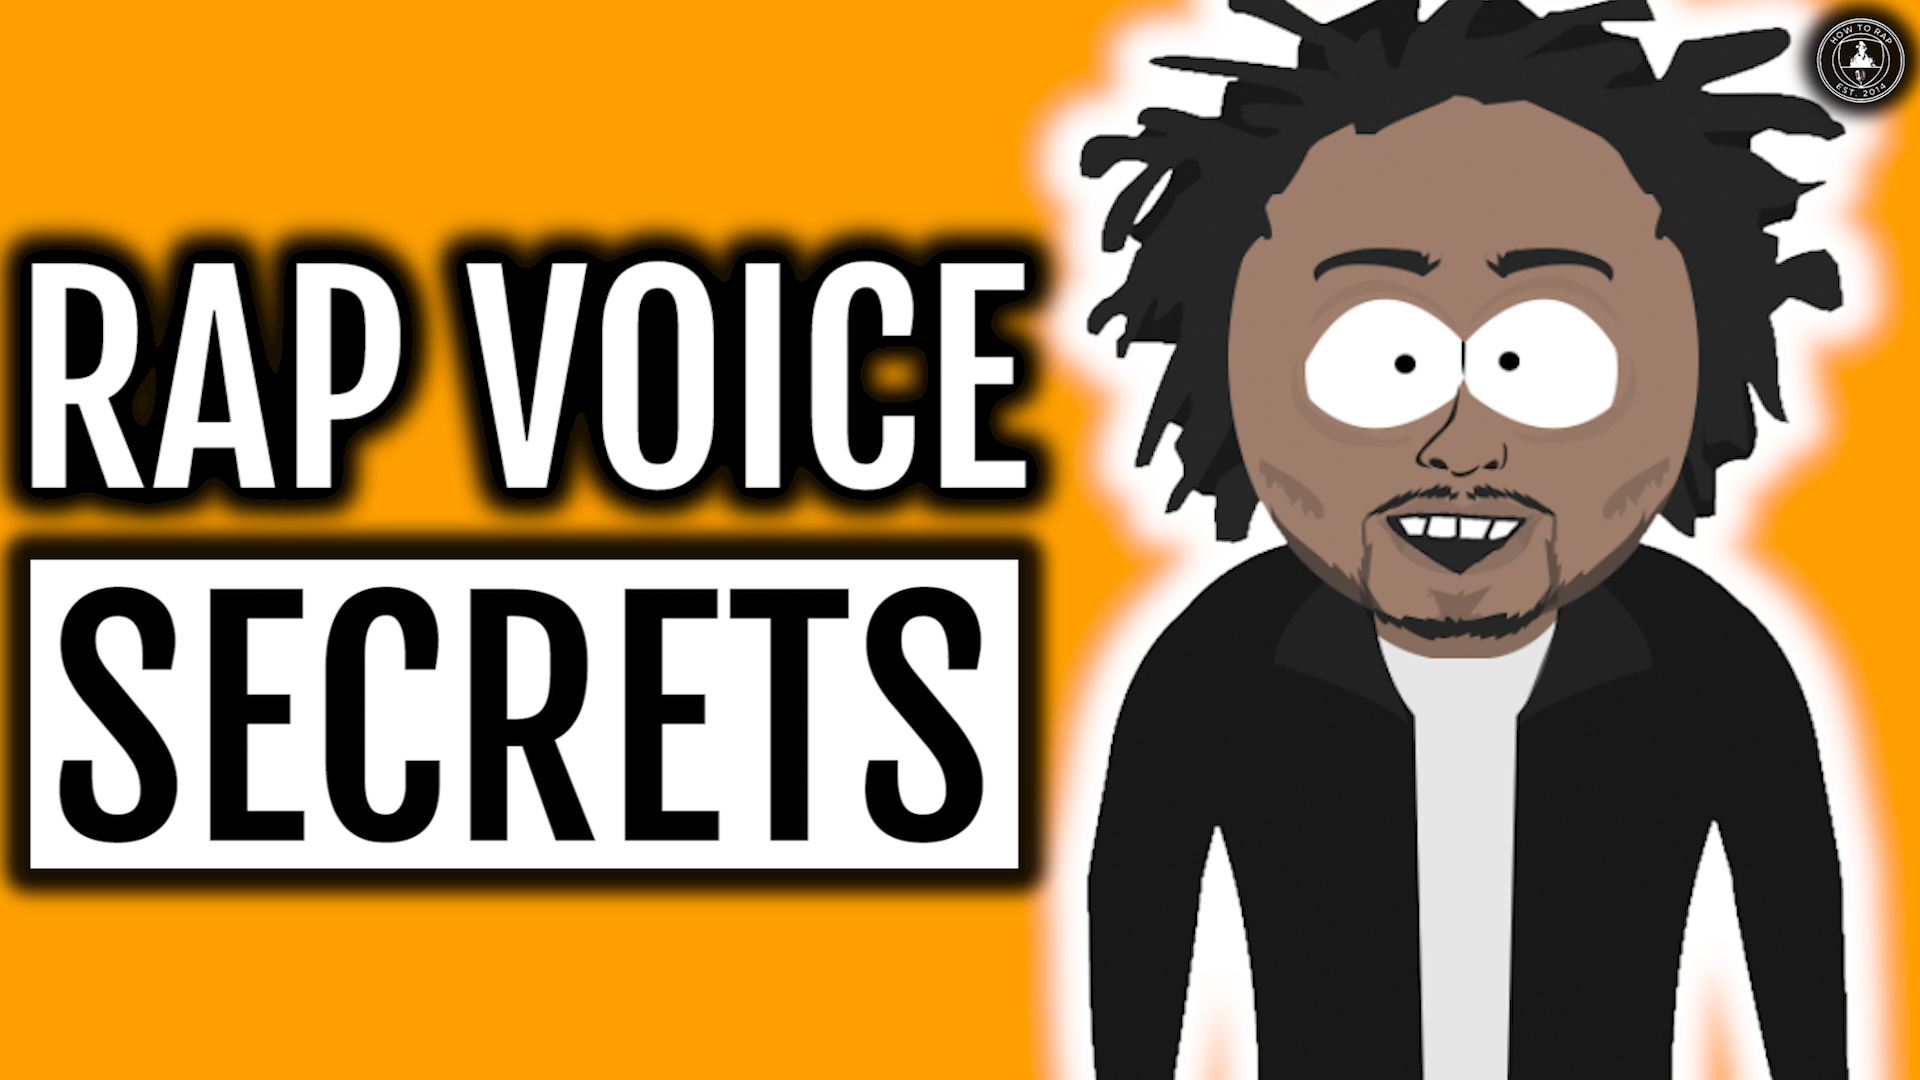 How To Develop A Great Rap Voice: Your FIRST Lesson